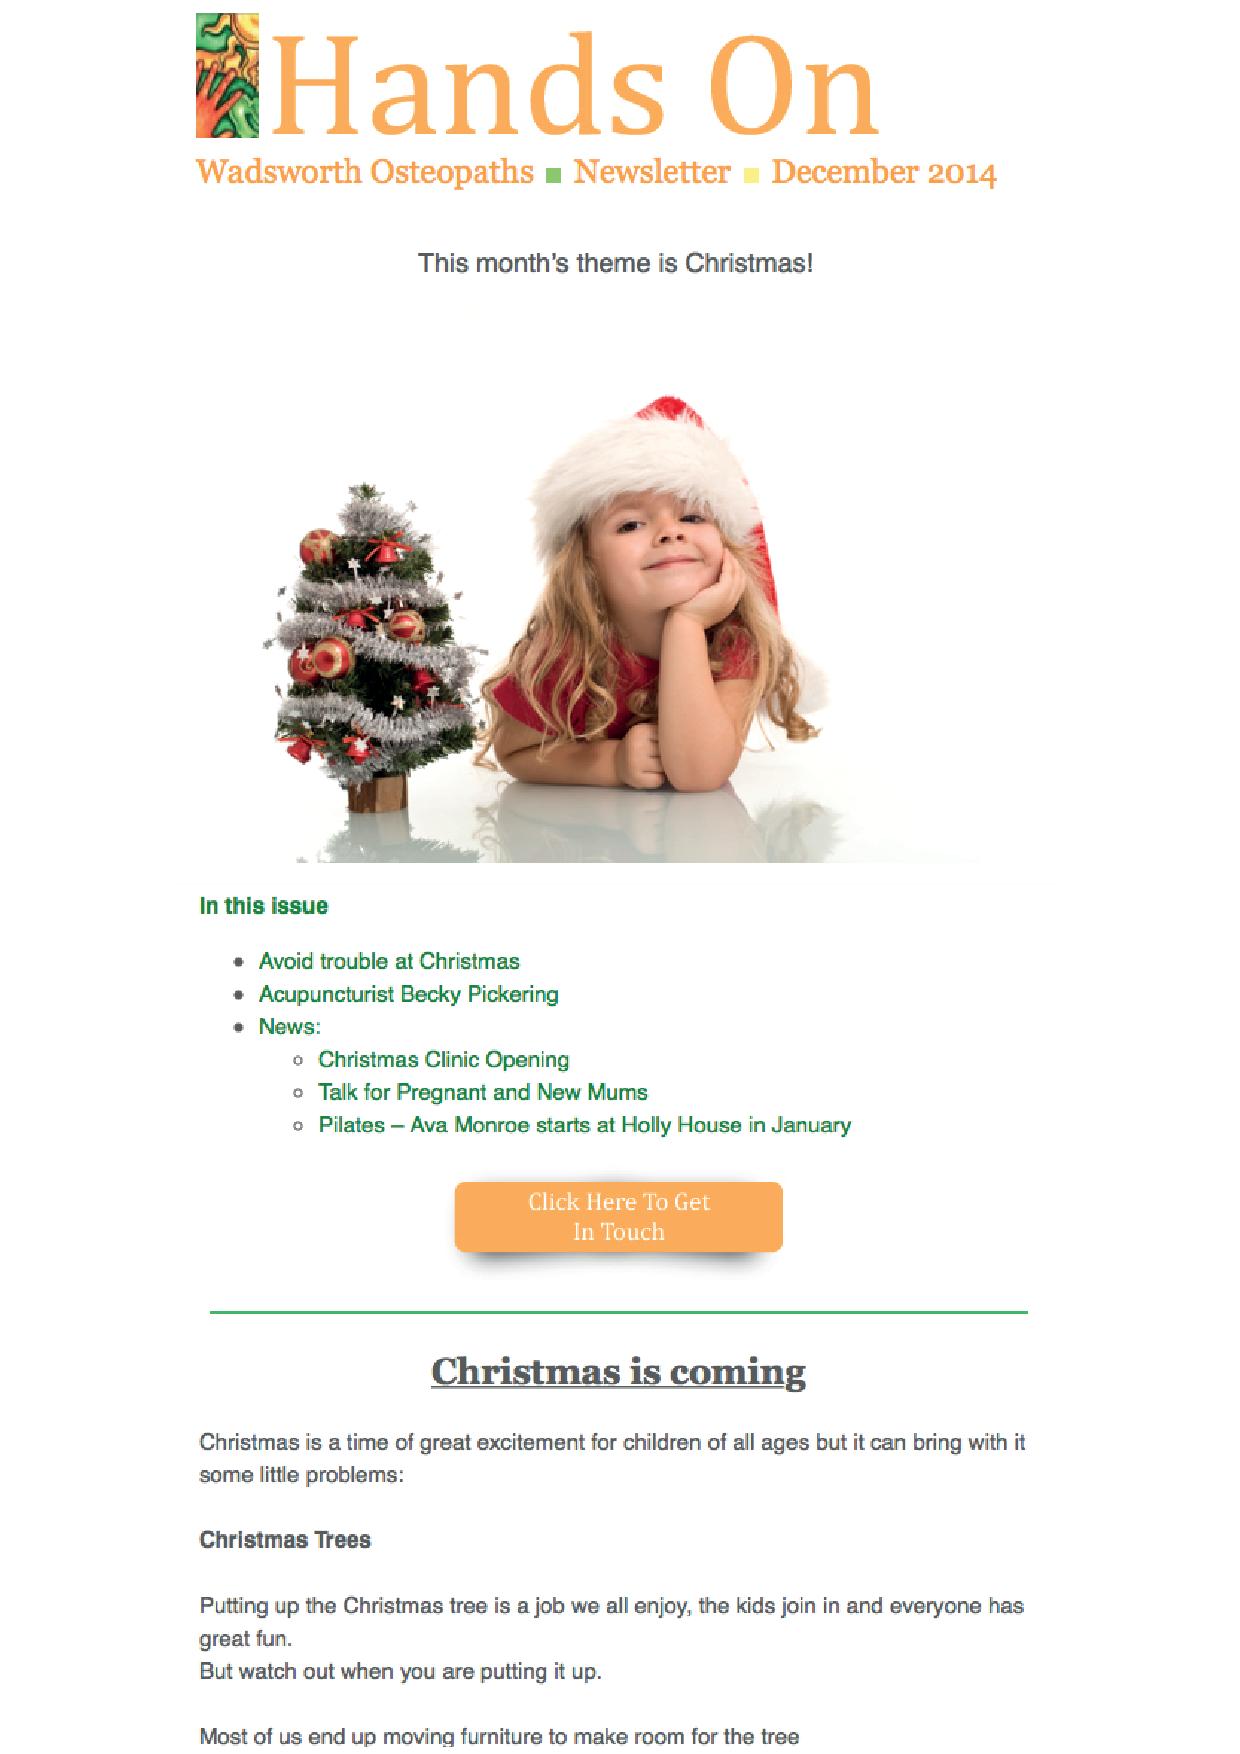 Wadsworth Osteopaths - Christmas newsletter